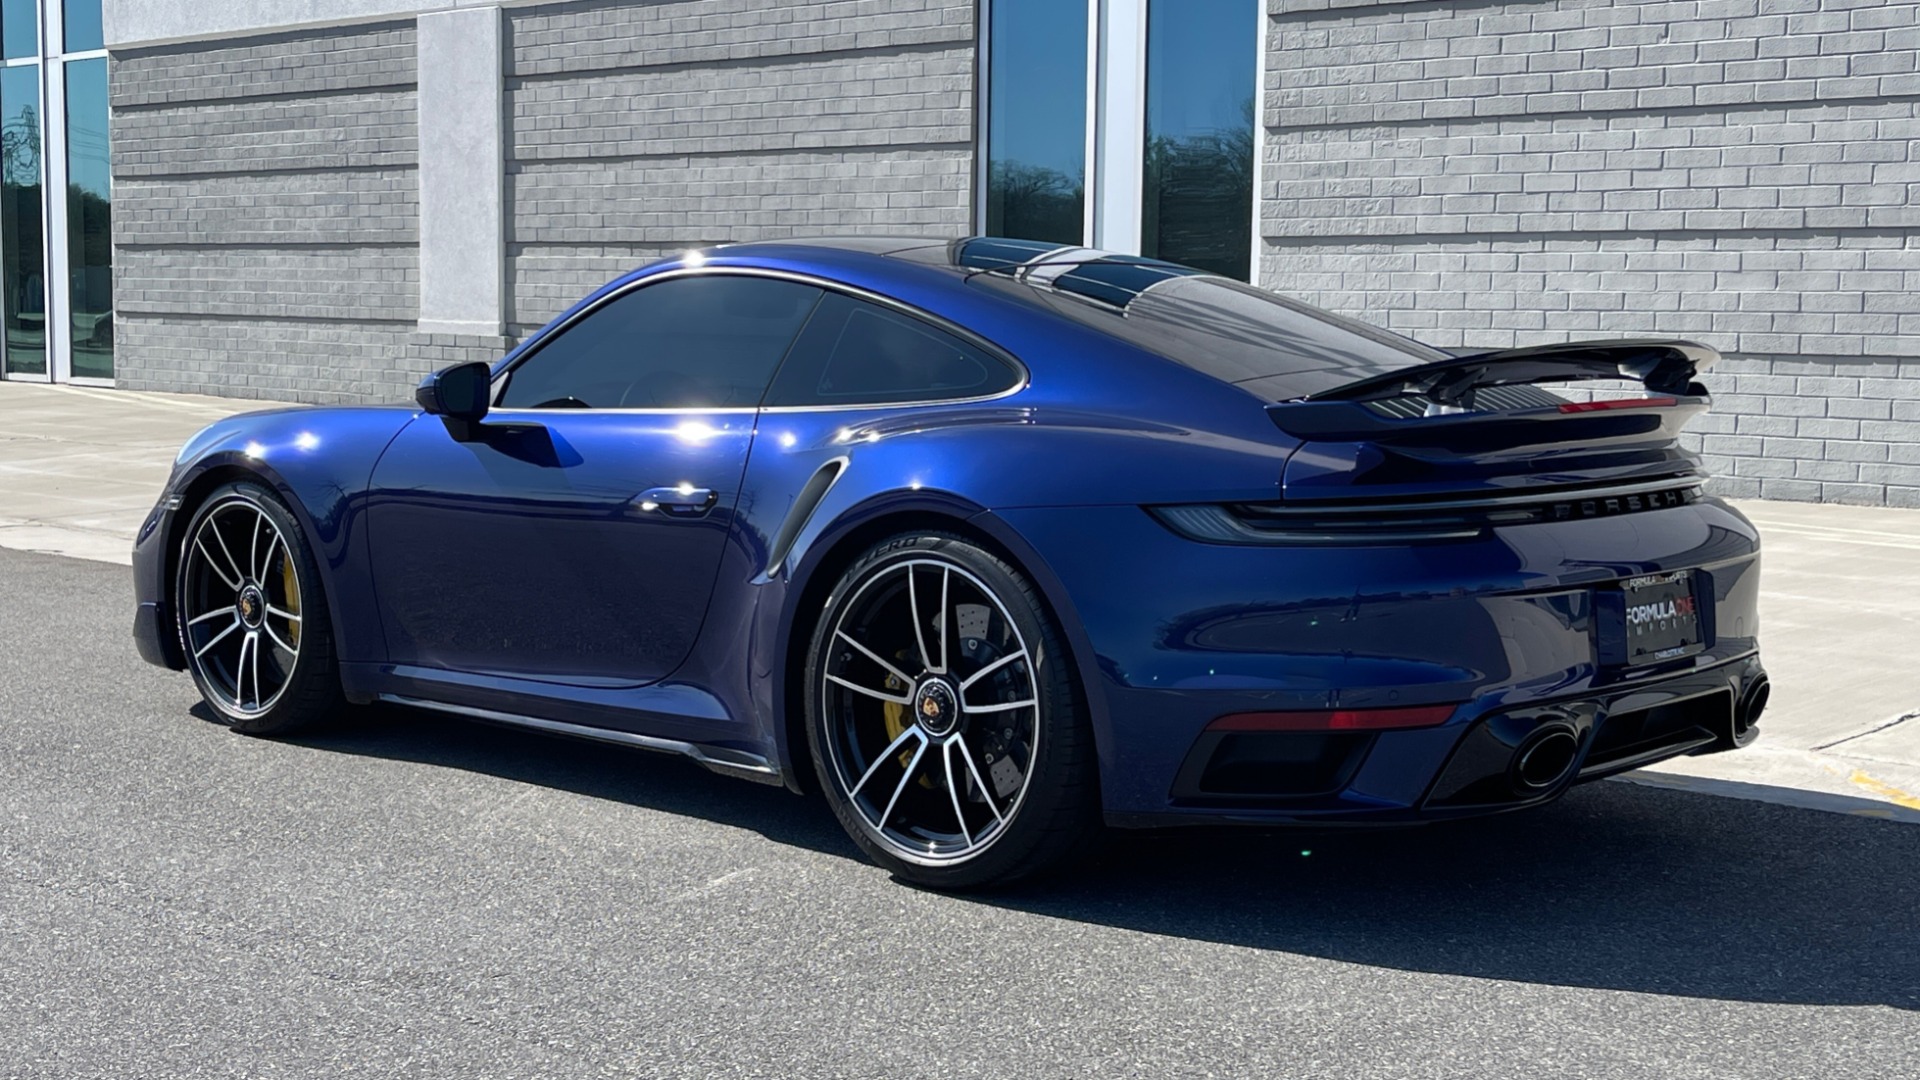 Used 2021 Porsche 911 TURBO S COUPE 3.8L / AWD / AUTO / NAV / SUNROOF / BOSE / REARVIEW for sale Sold at Formula Imports in Charlotte NC 28227 15